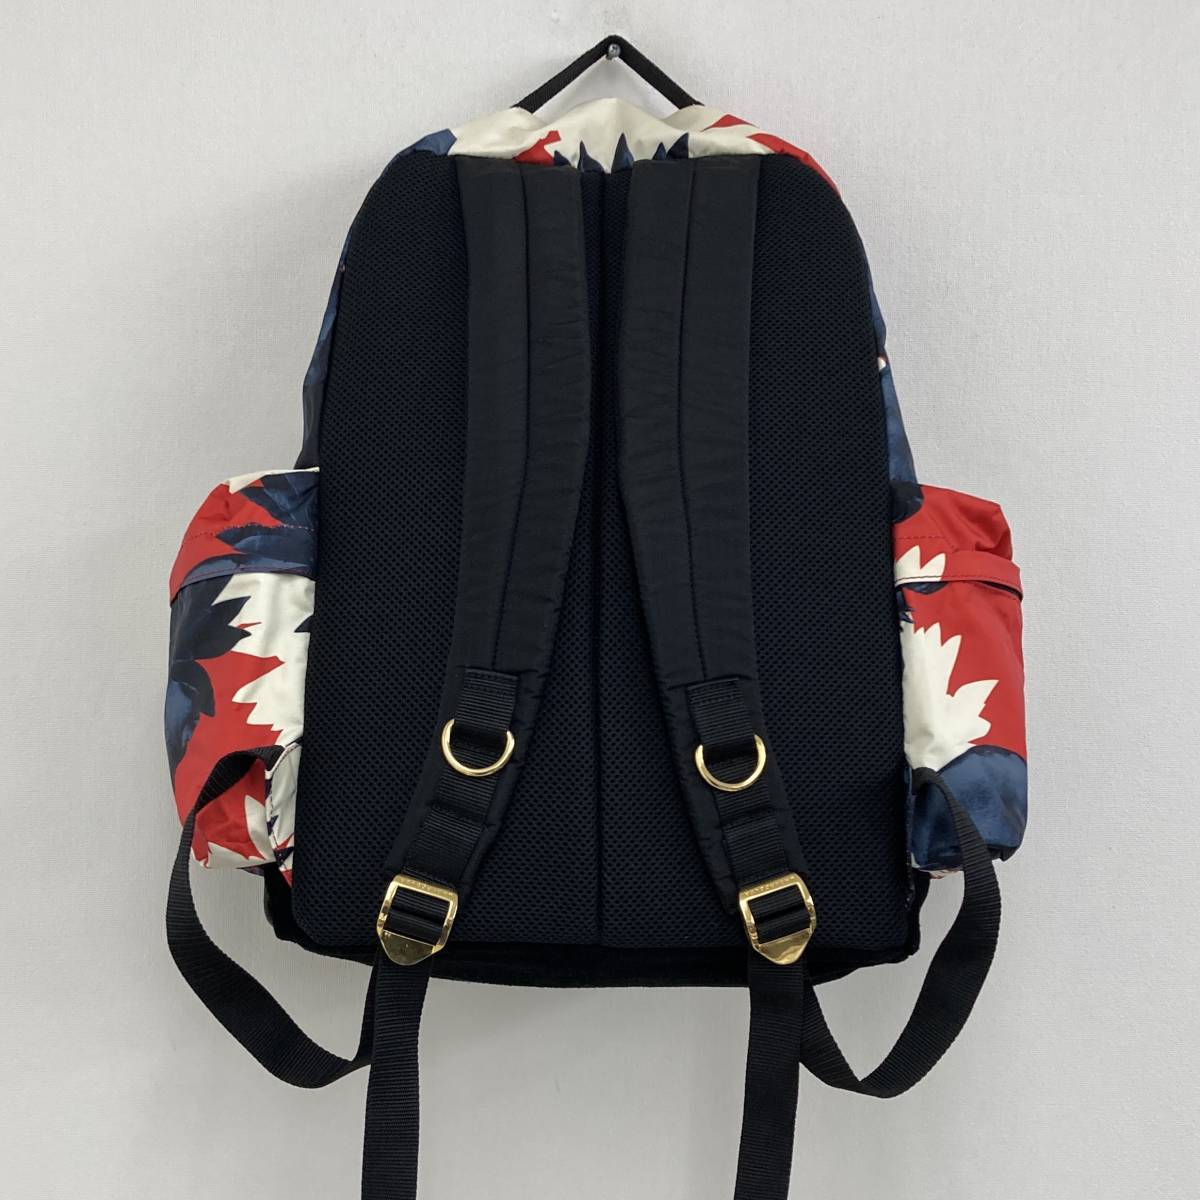 2021SS UNDERCOVER stone image total pattern backpack suede switch undercover rucksack bag bag archive 3060509